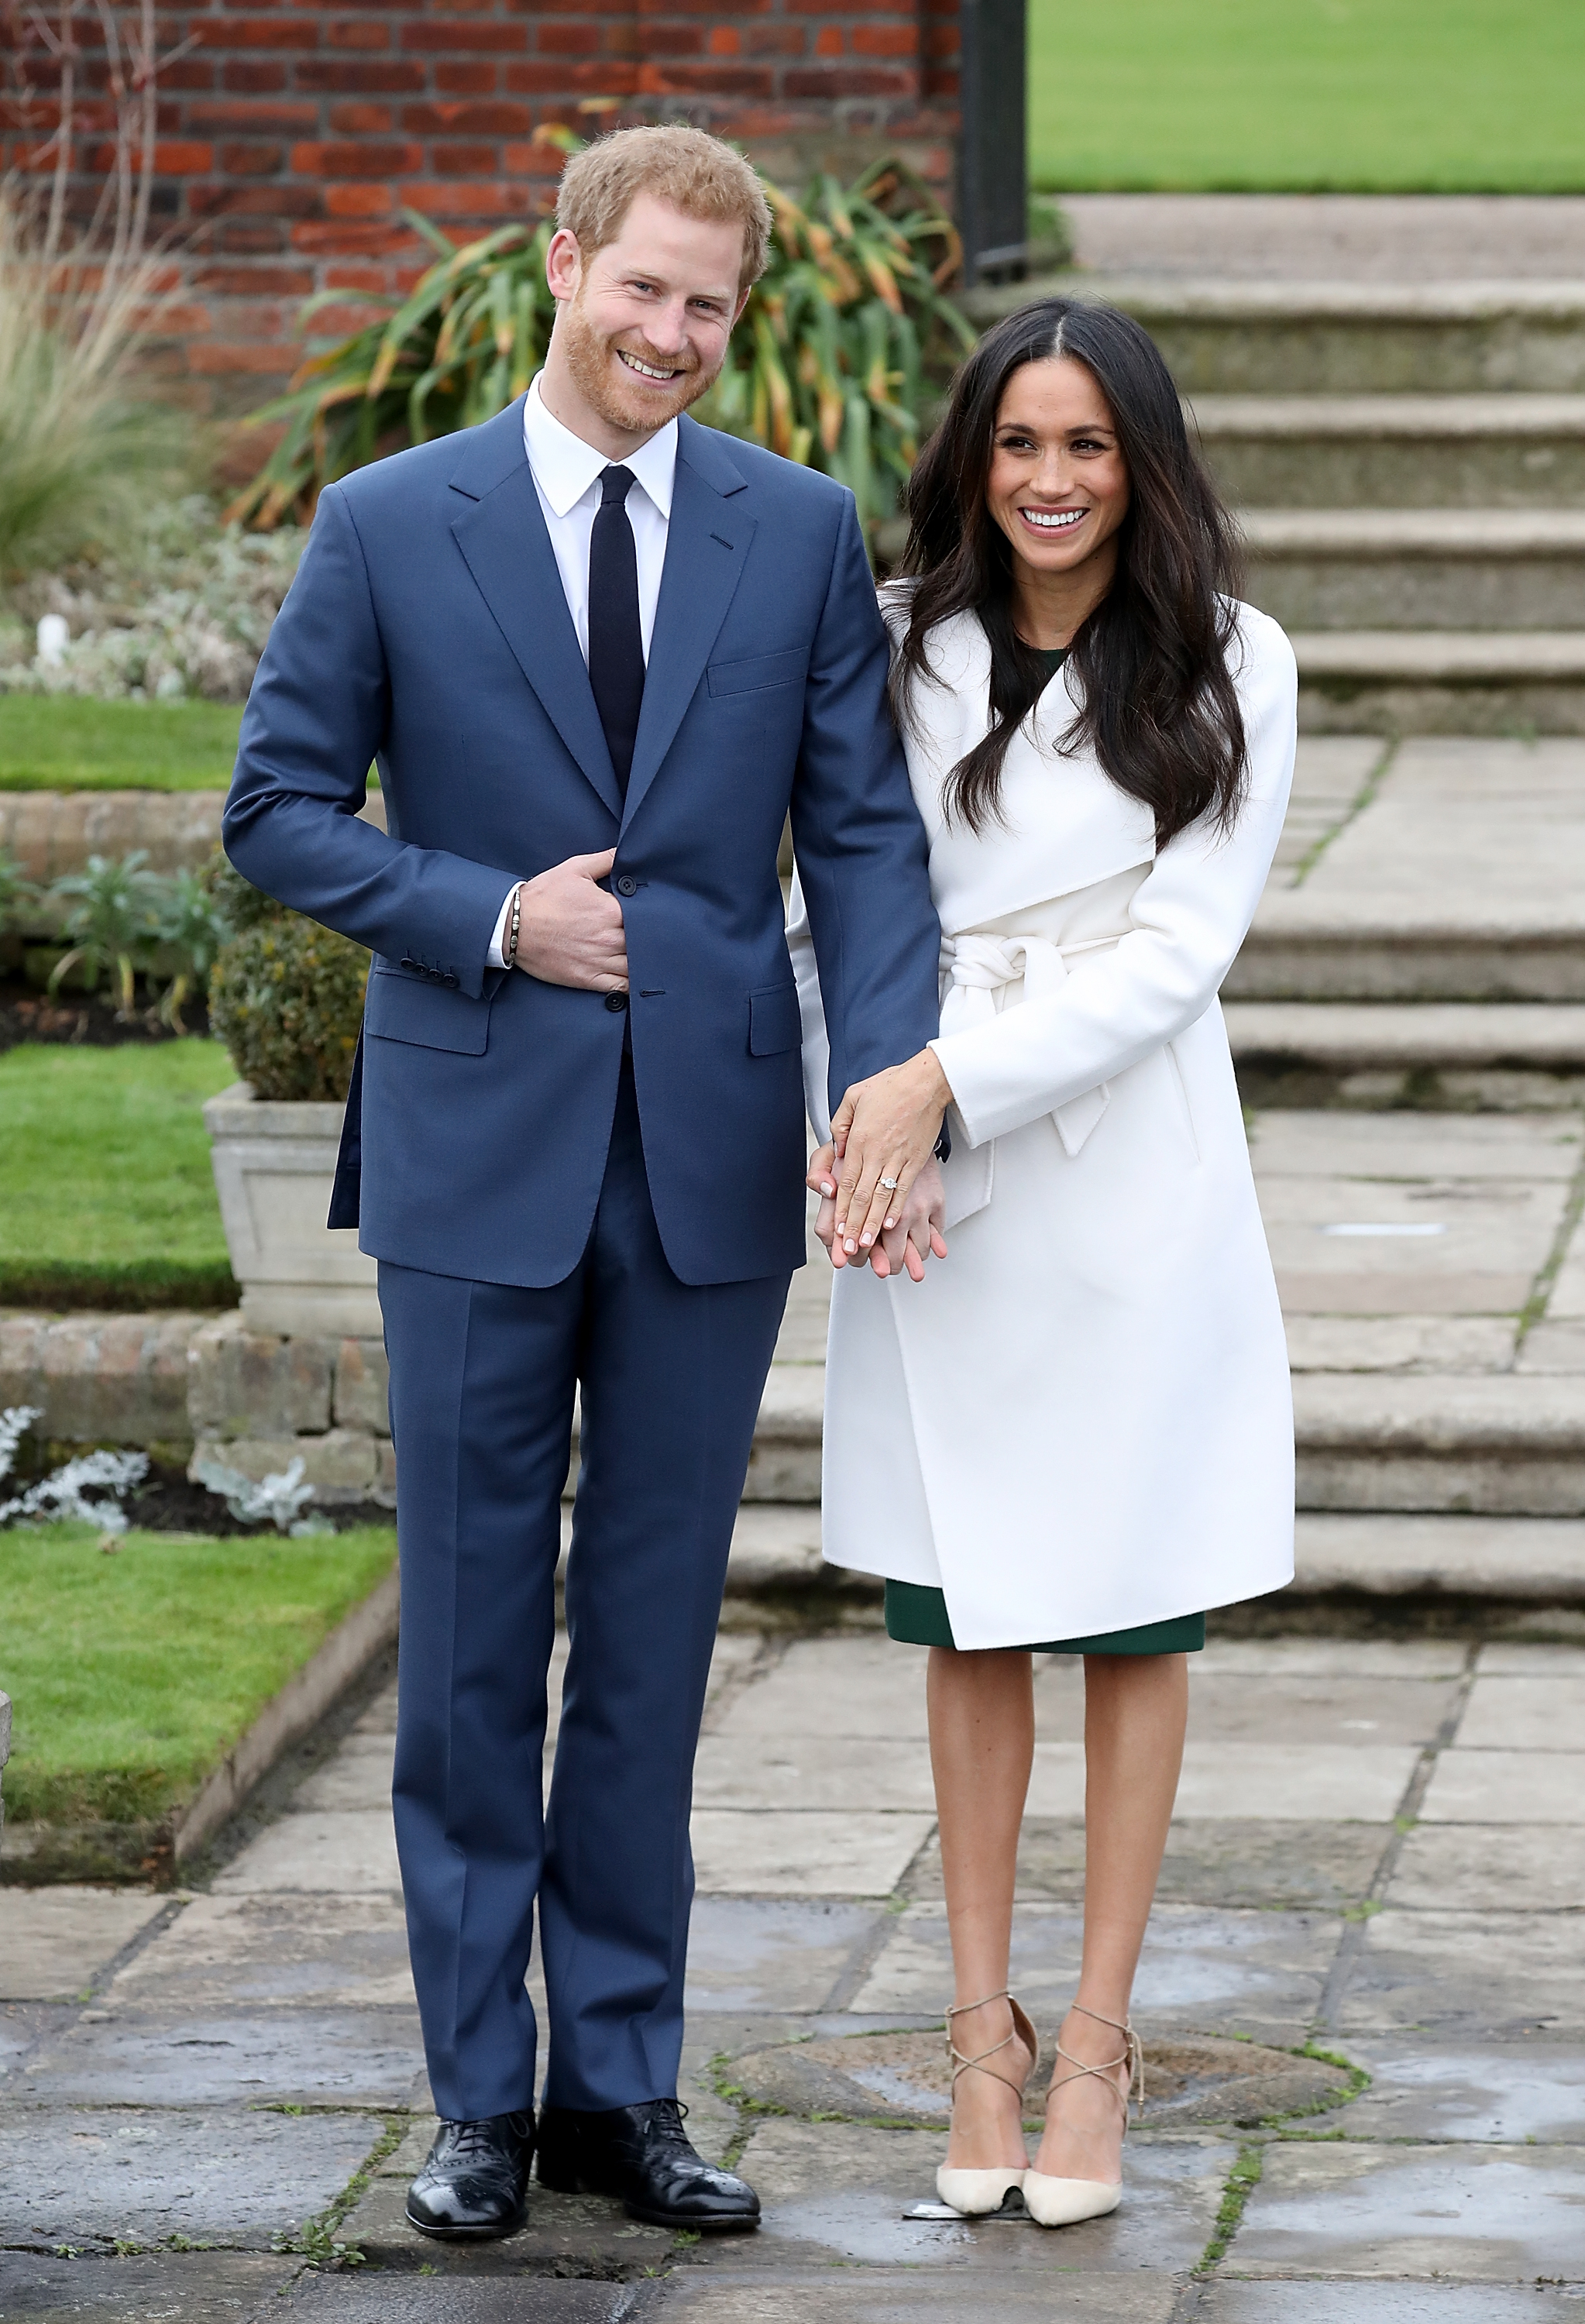 Meghan Markle and Prince Harry  during an official photocall to announce their engagement at The Sunken Gardens at Kensington Palace on November 27, 2017 in London, England | Source: Getty Images